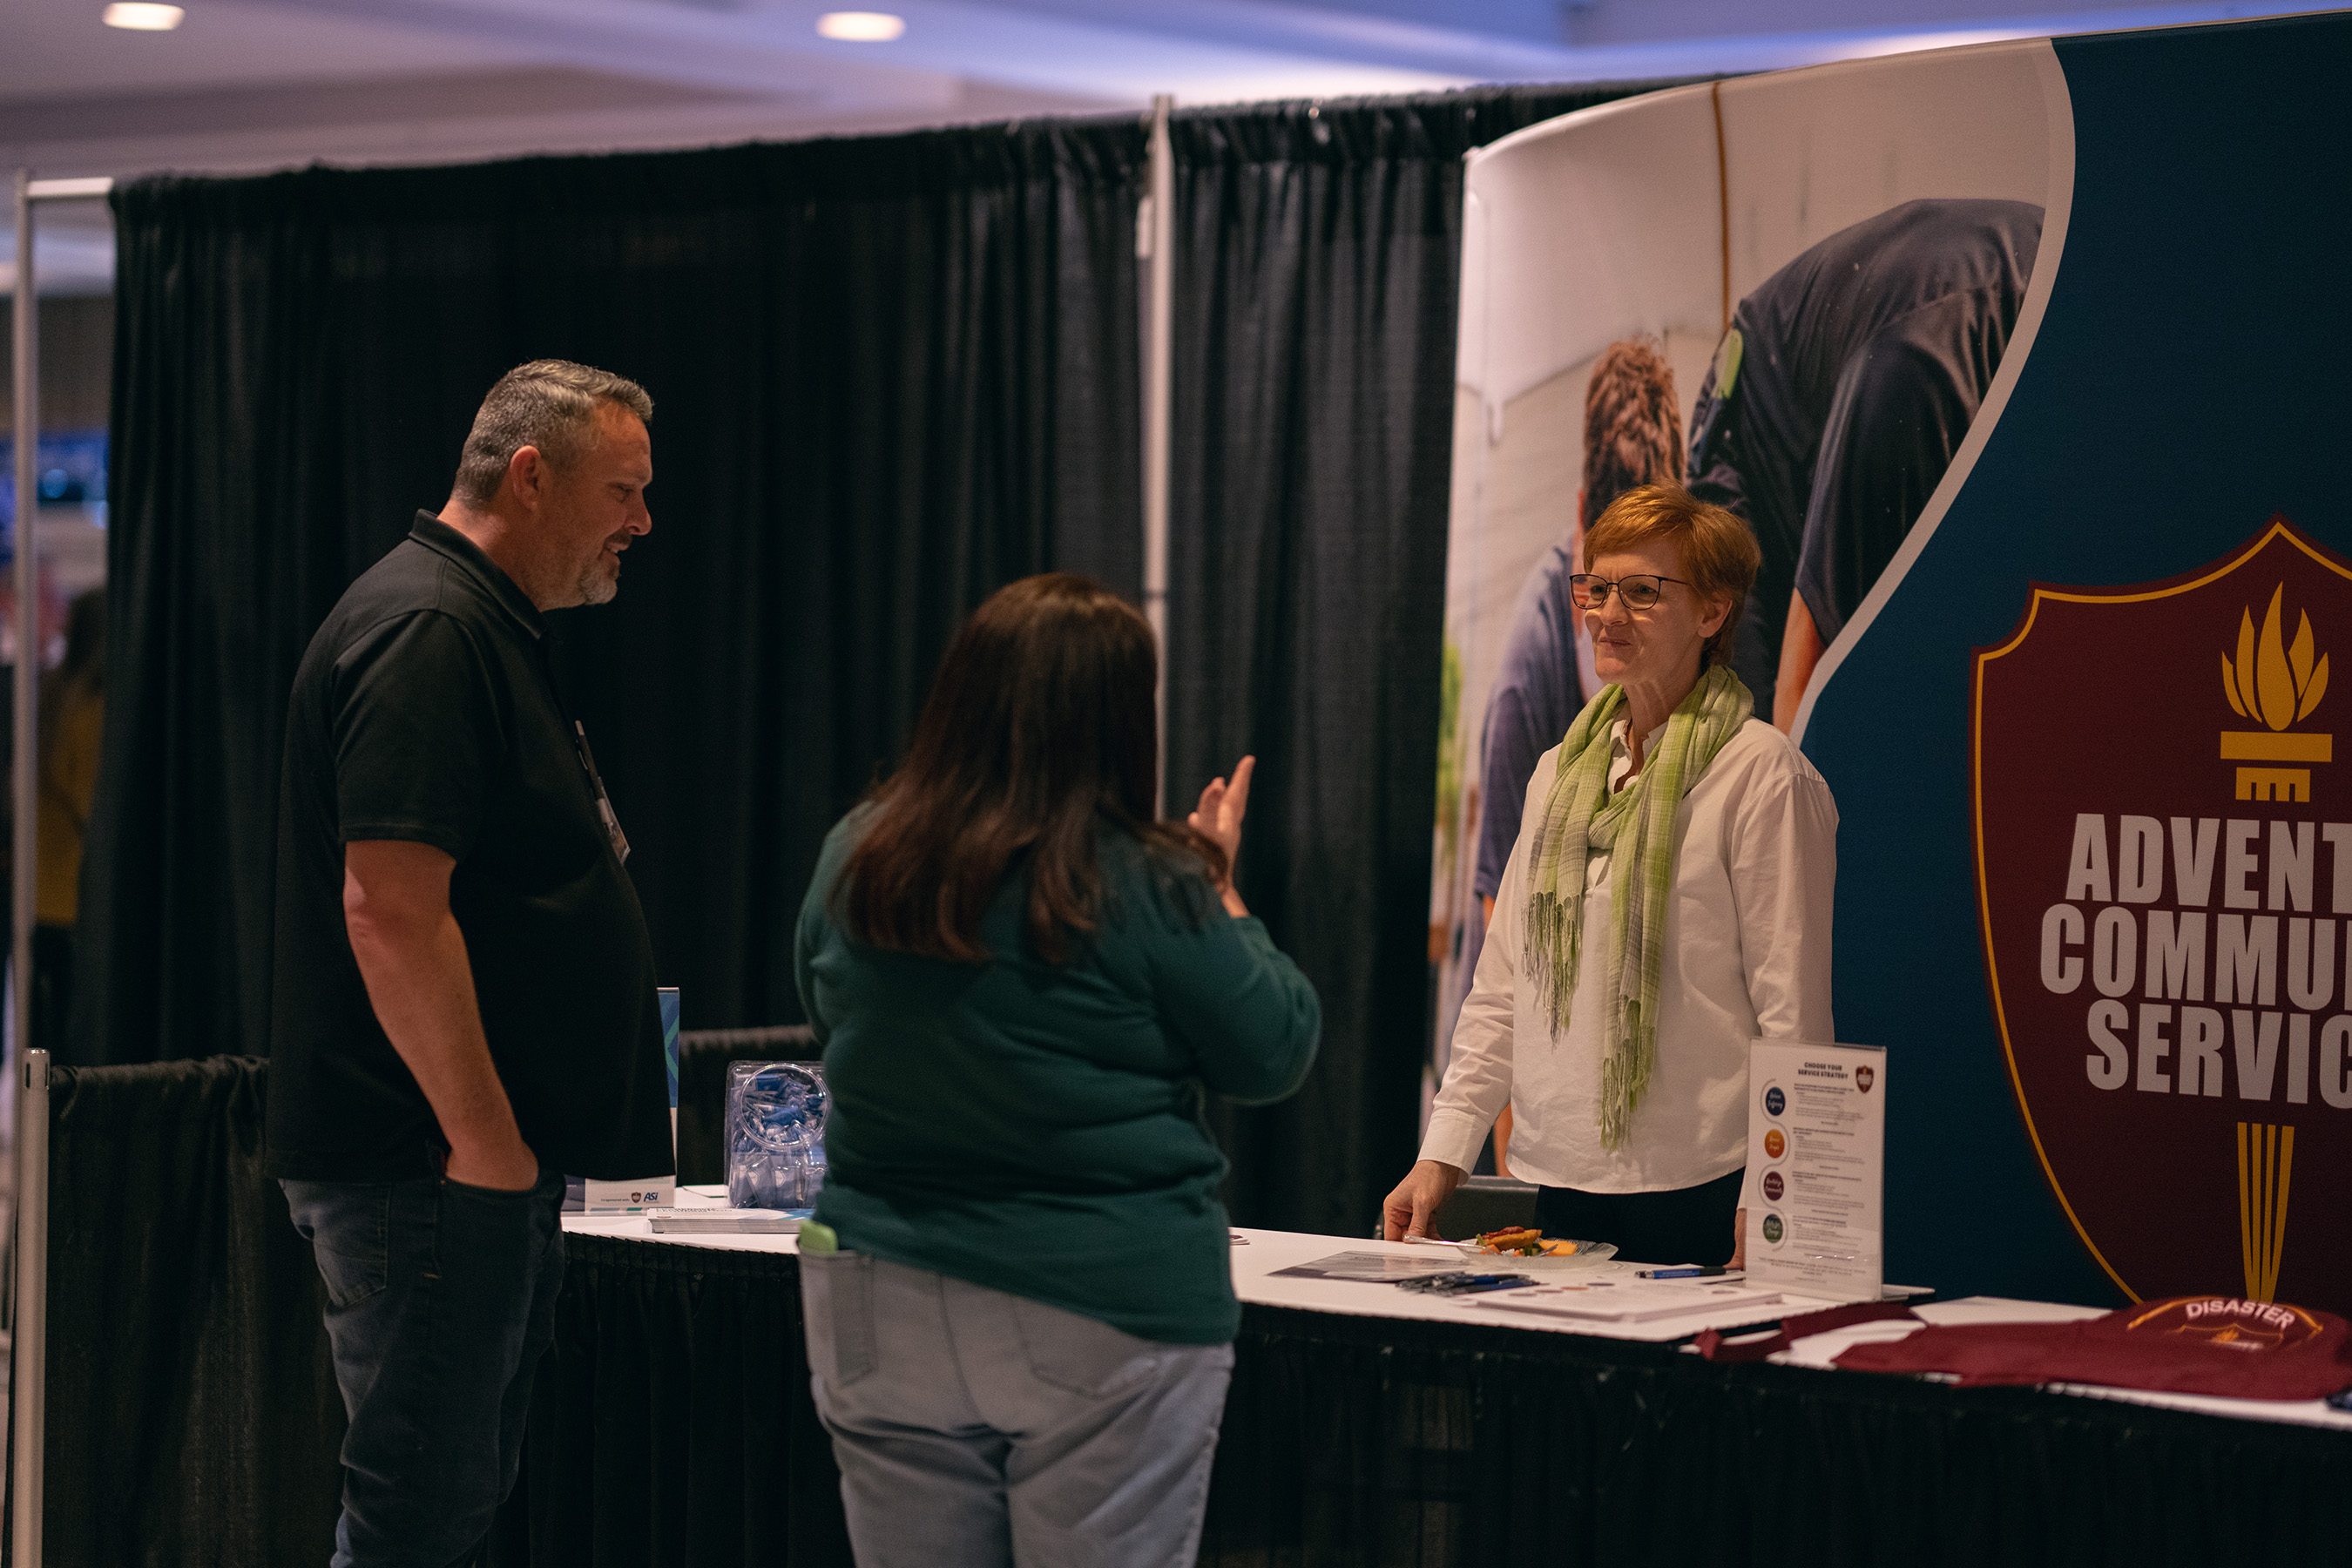 Colette Newer, North American Division (NAD) associate director, ACS, engages with visitors in the exhibit hall of the NAD's Adventist Ministries Convention